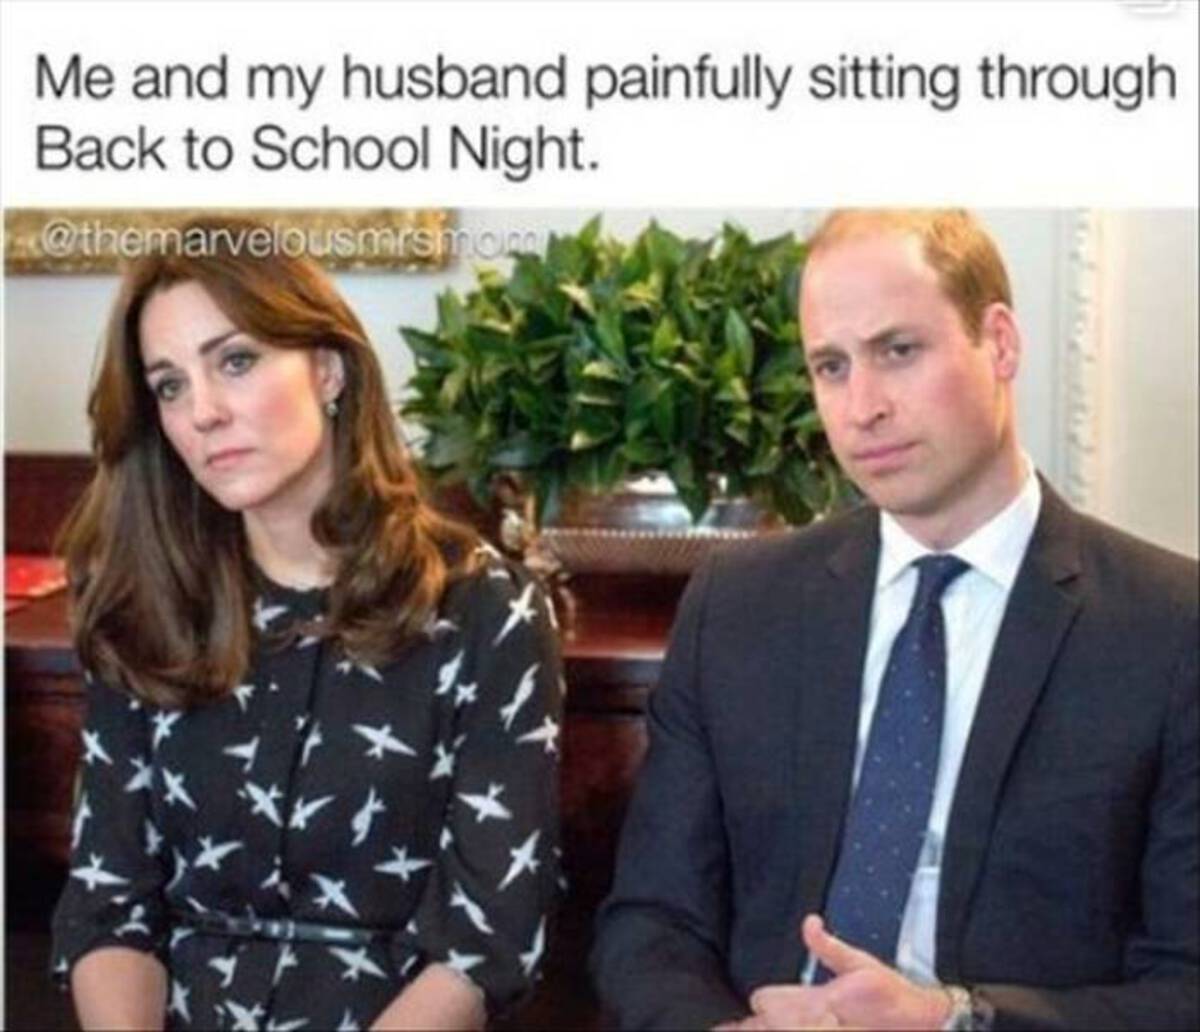 prince william and kate sad - Me and my husband painfully sitting through Back to School Night.